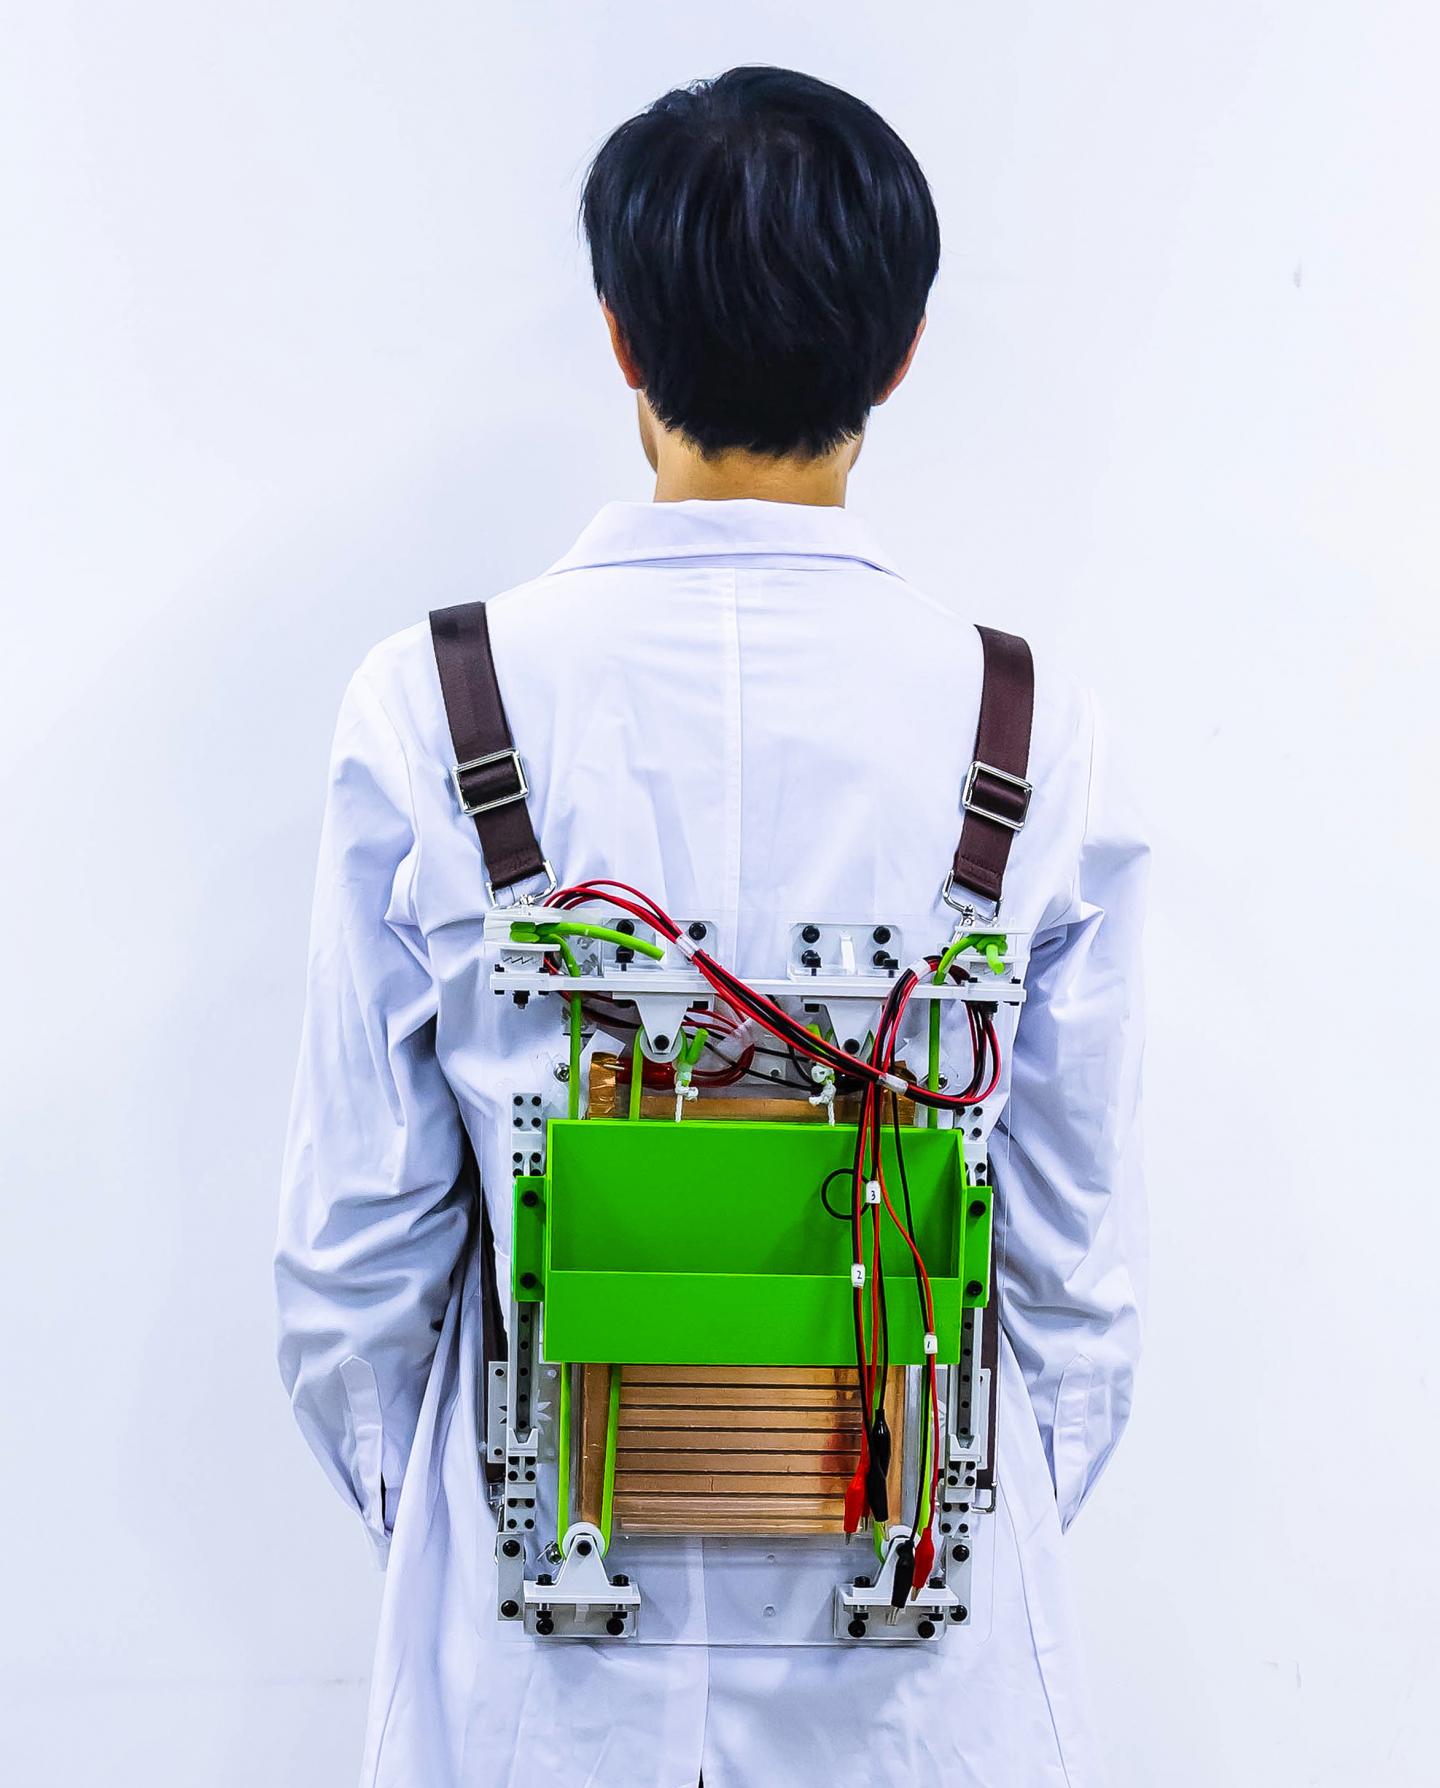 Load-reducing backpack powers electronics by harvesting energy from walking